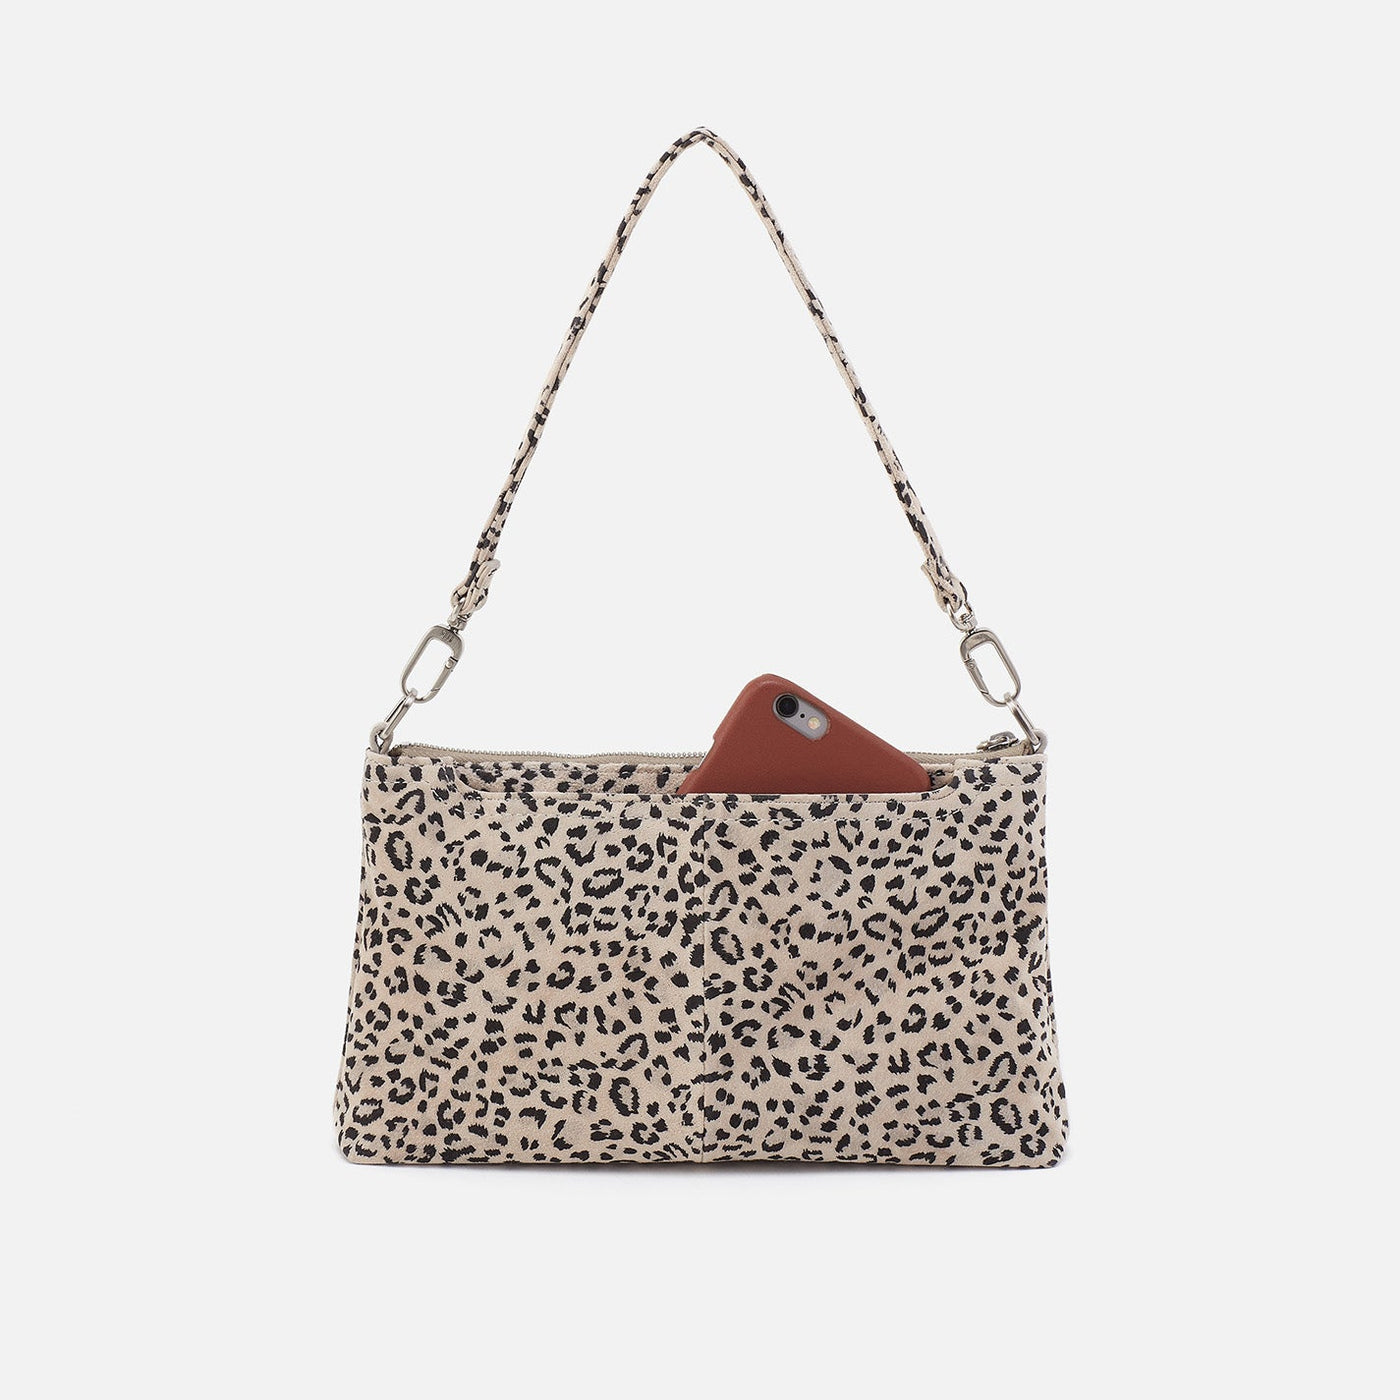 Darcy Crossbody In Printed Leather - Mini Leopard